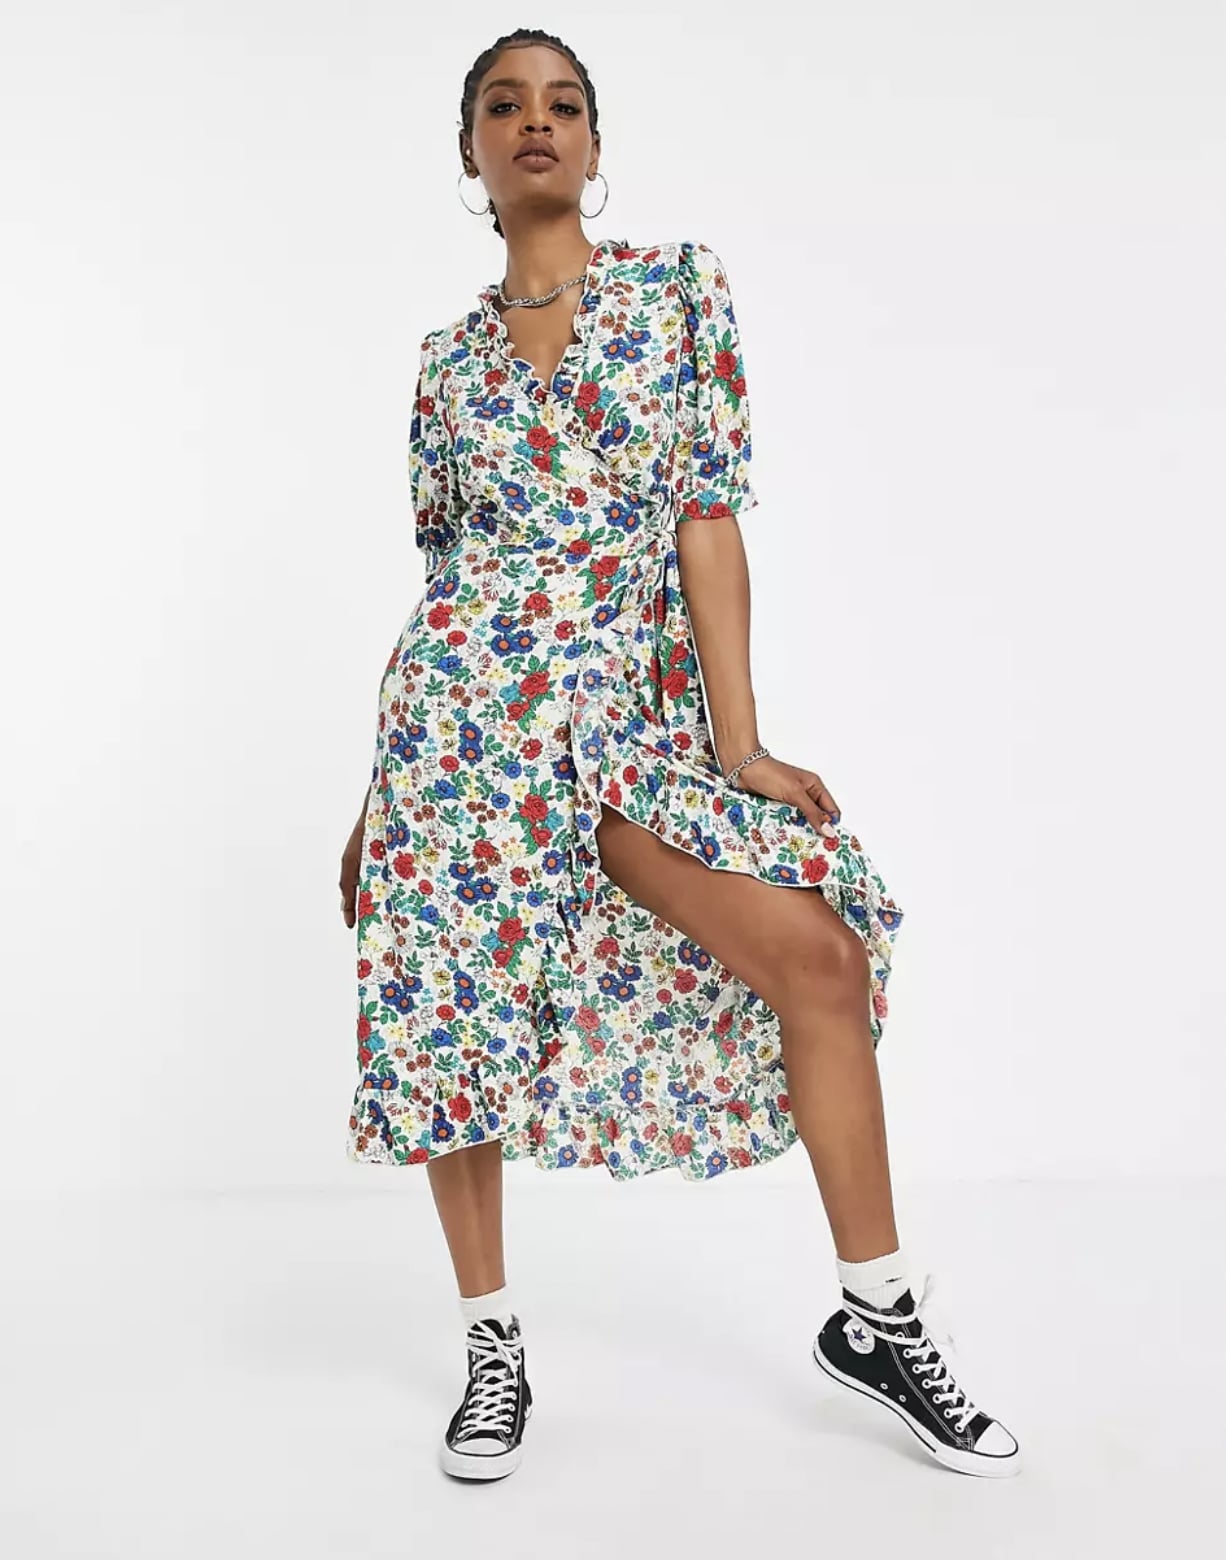 For Daytime Wear: Topshop Tall Printed Floral Midi Dress